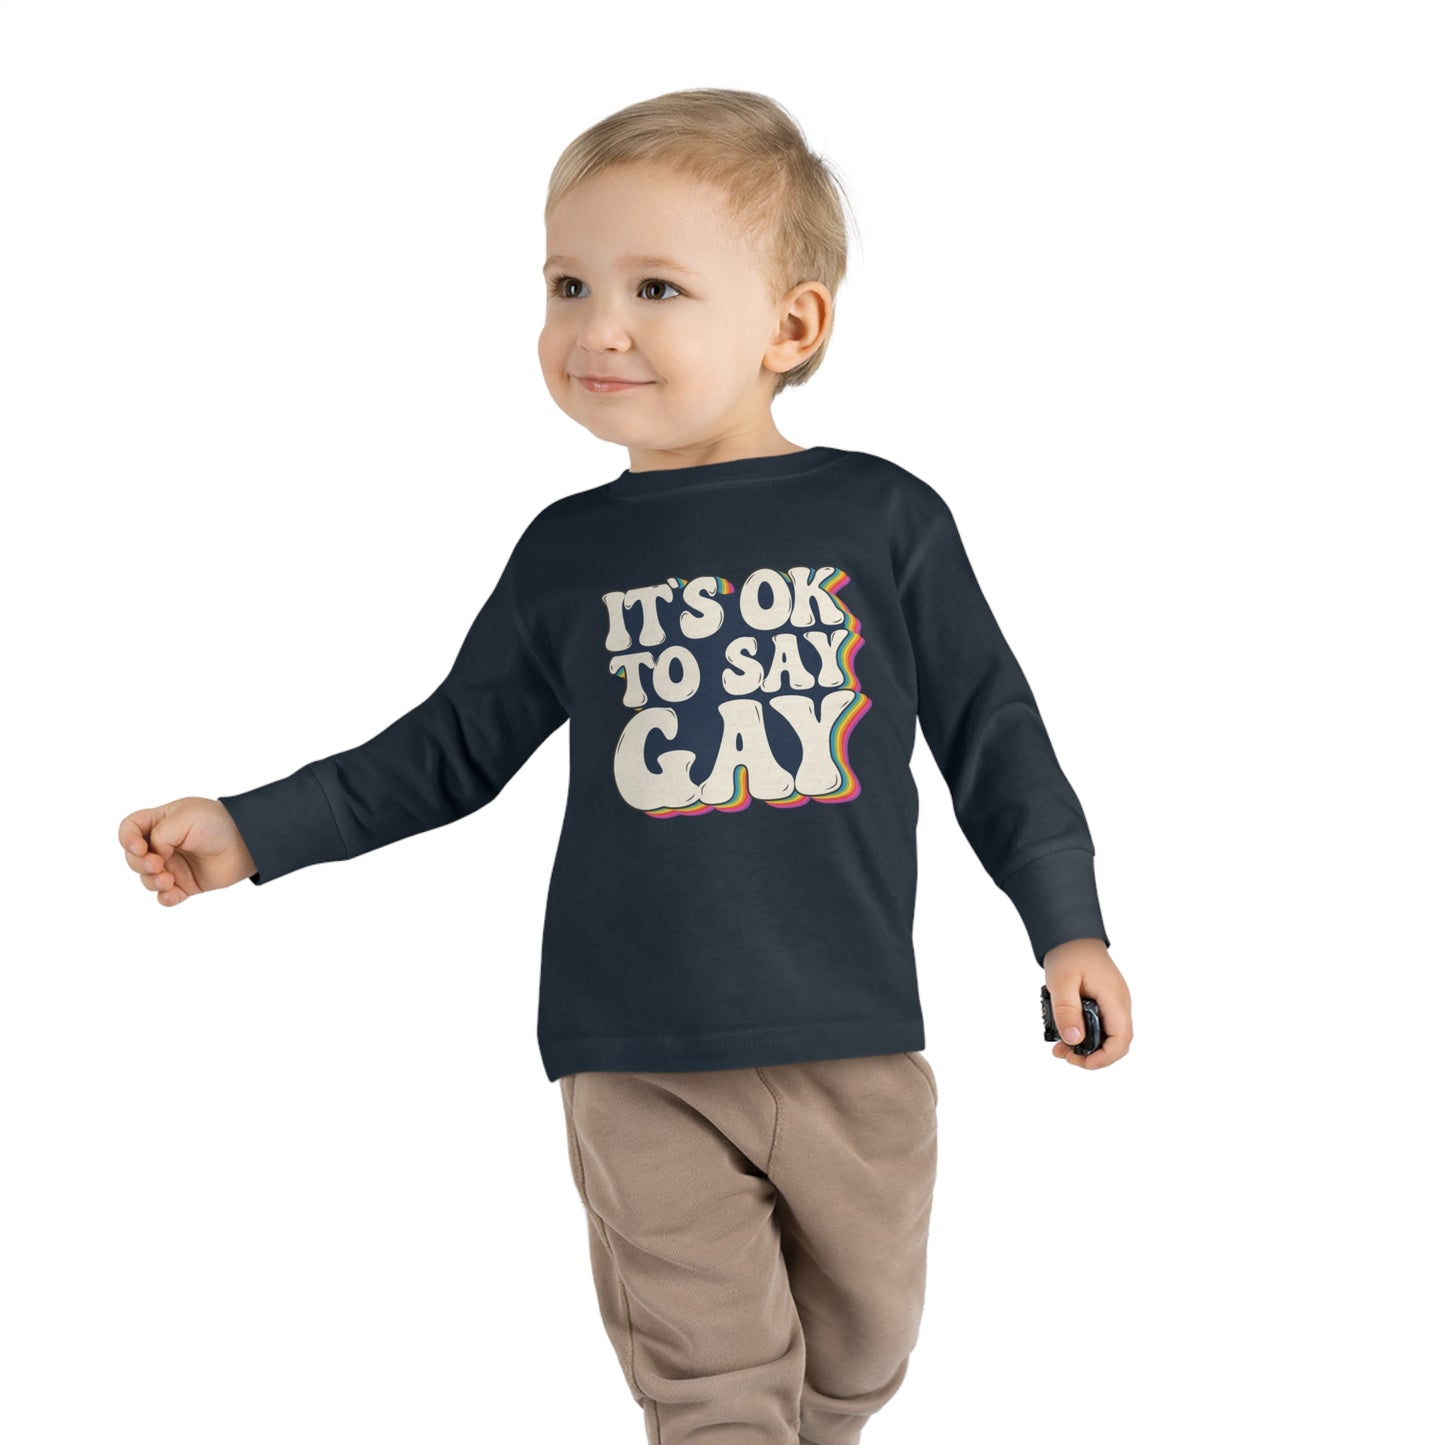 “It’s OK to Say Gay” Toddler Long Sleeve Tee